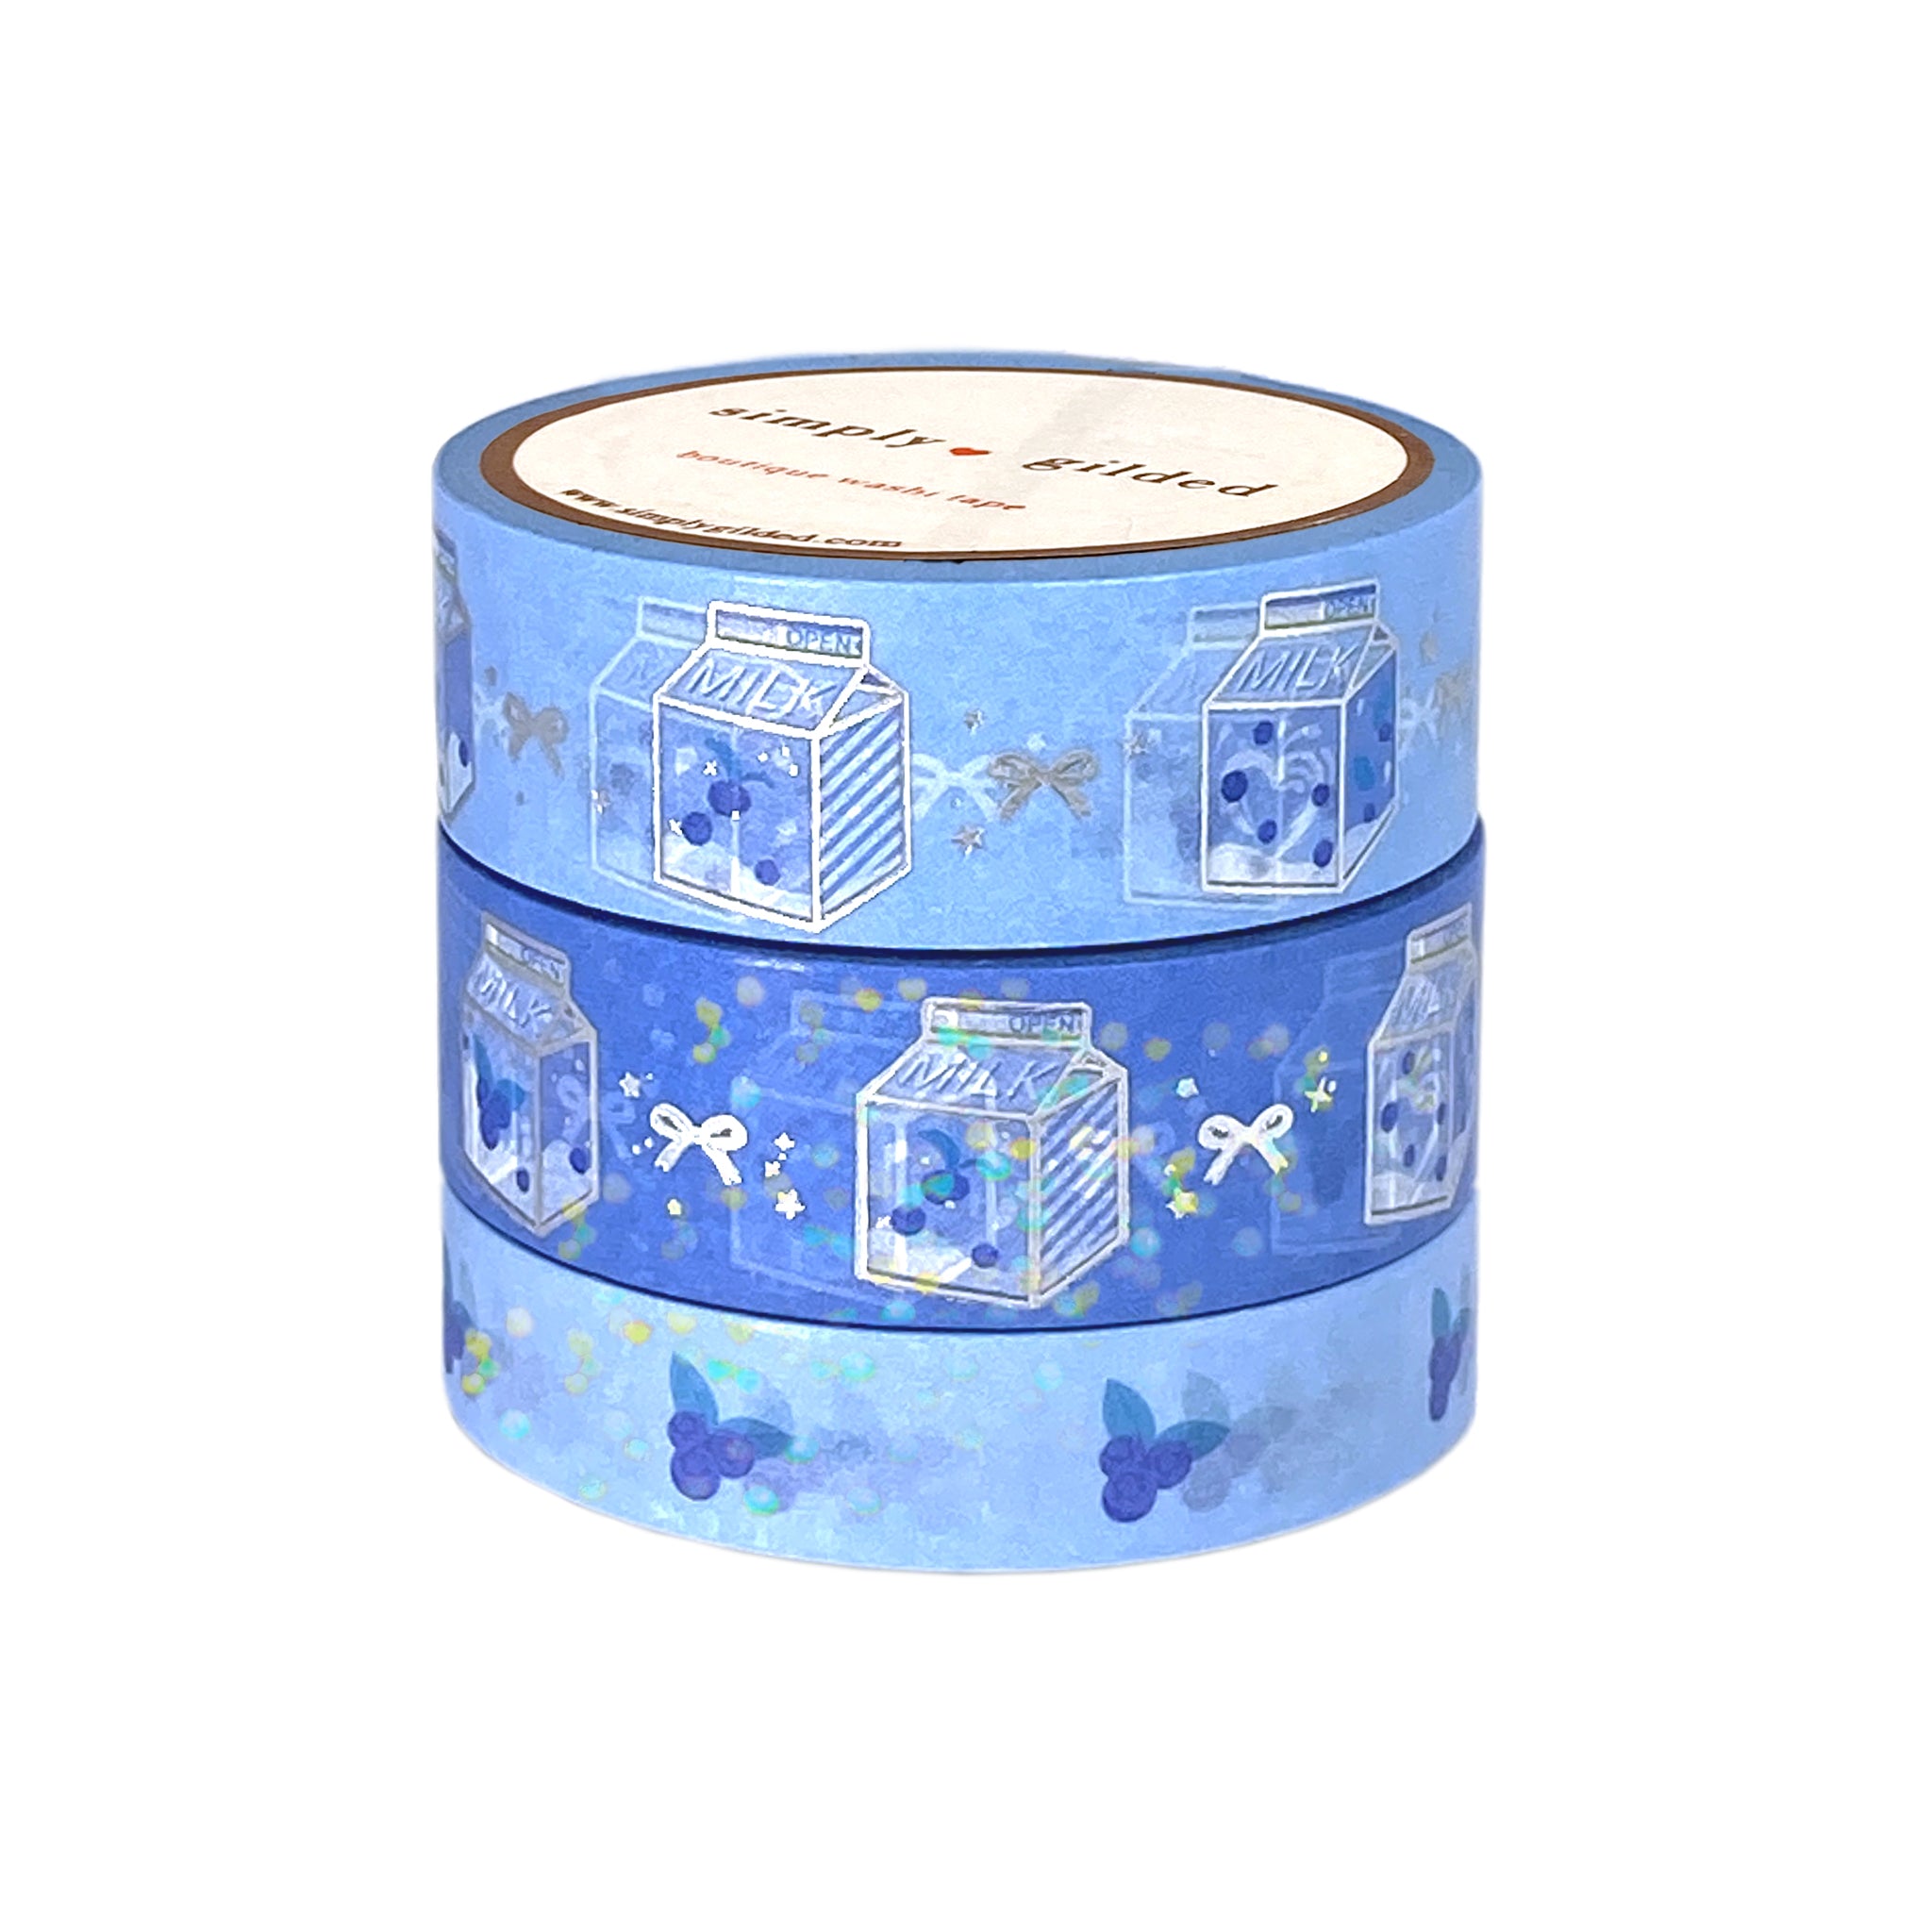 12 Packs: 7 ct. (84 total) Blue Foil & Glitter Crafting Washi Tapes by  Recollections™